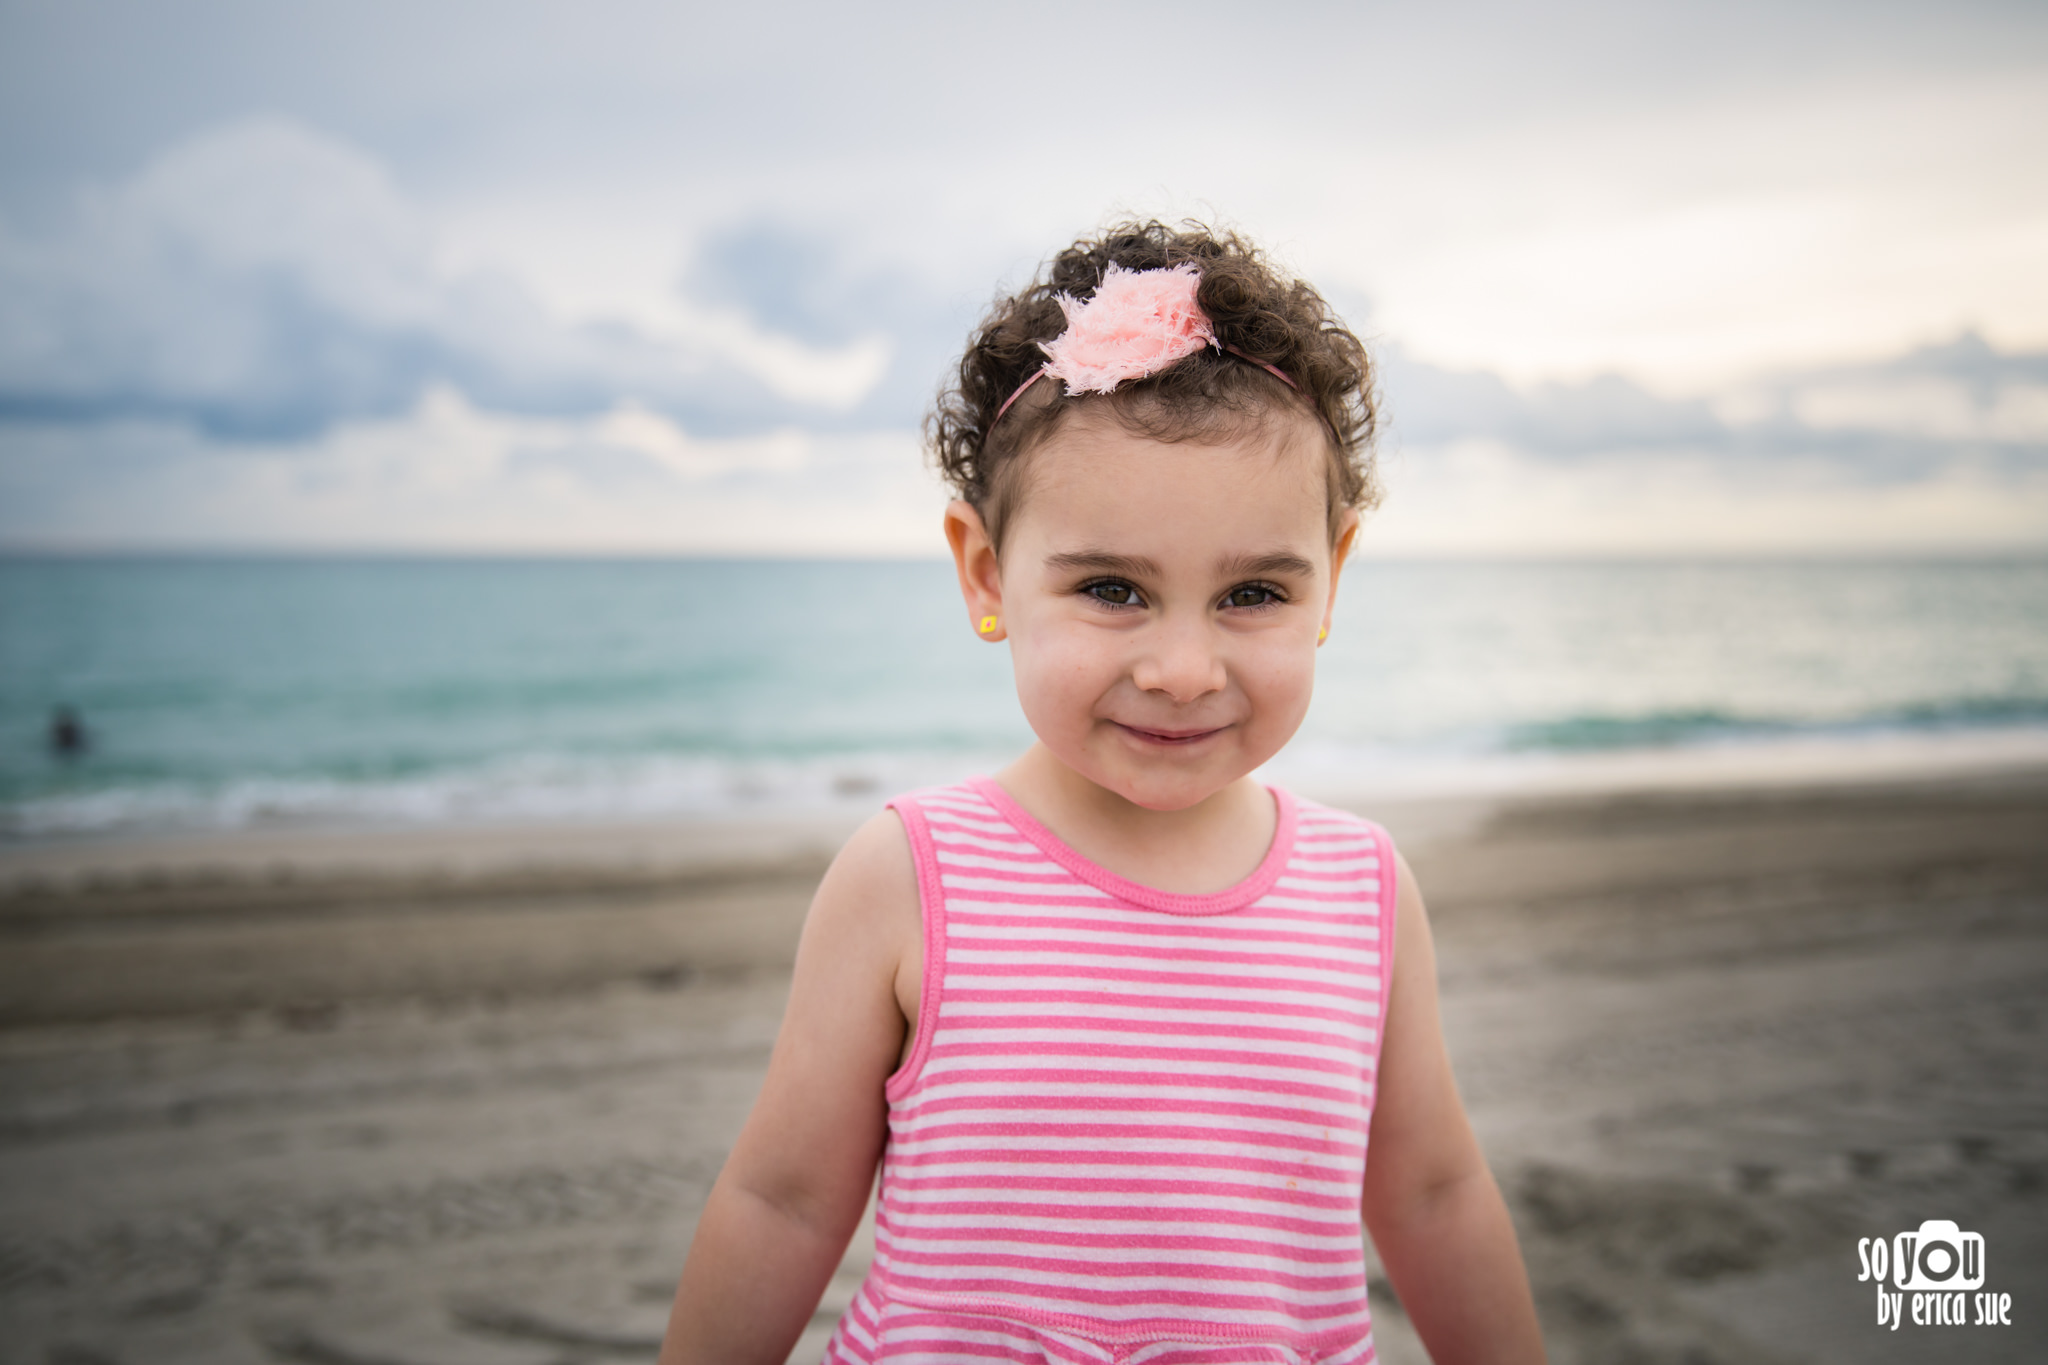 so-you-by-erica-sue-hollywood-beach-lifestyle-family-photographer-session-1052.JPG